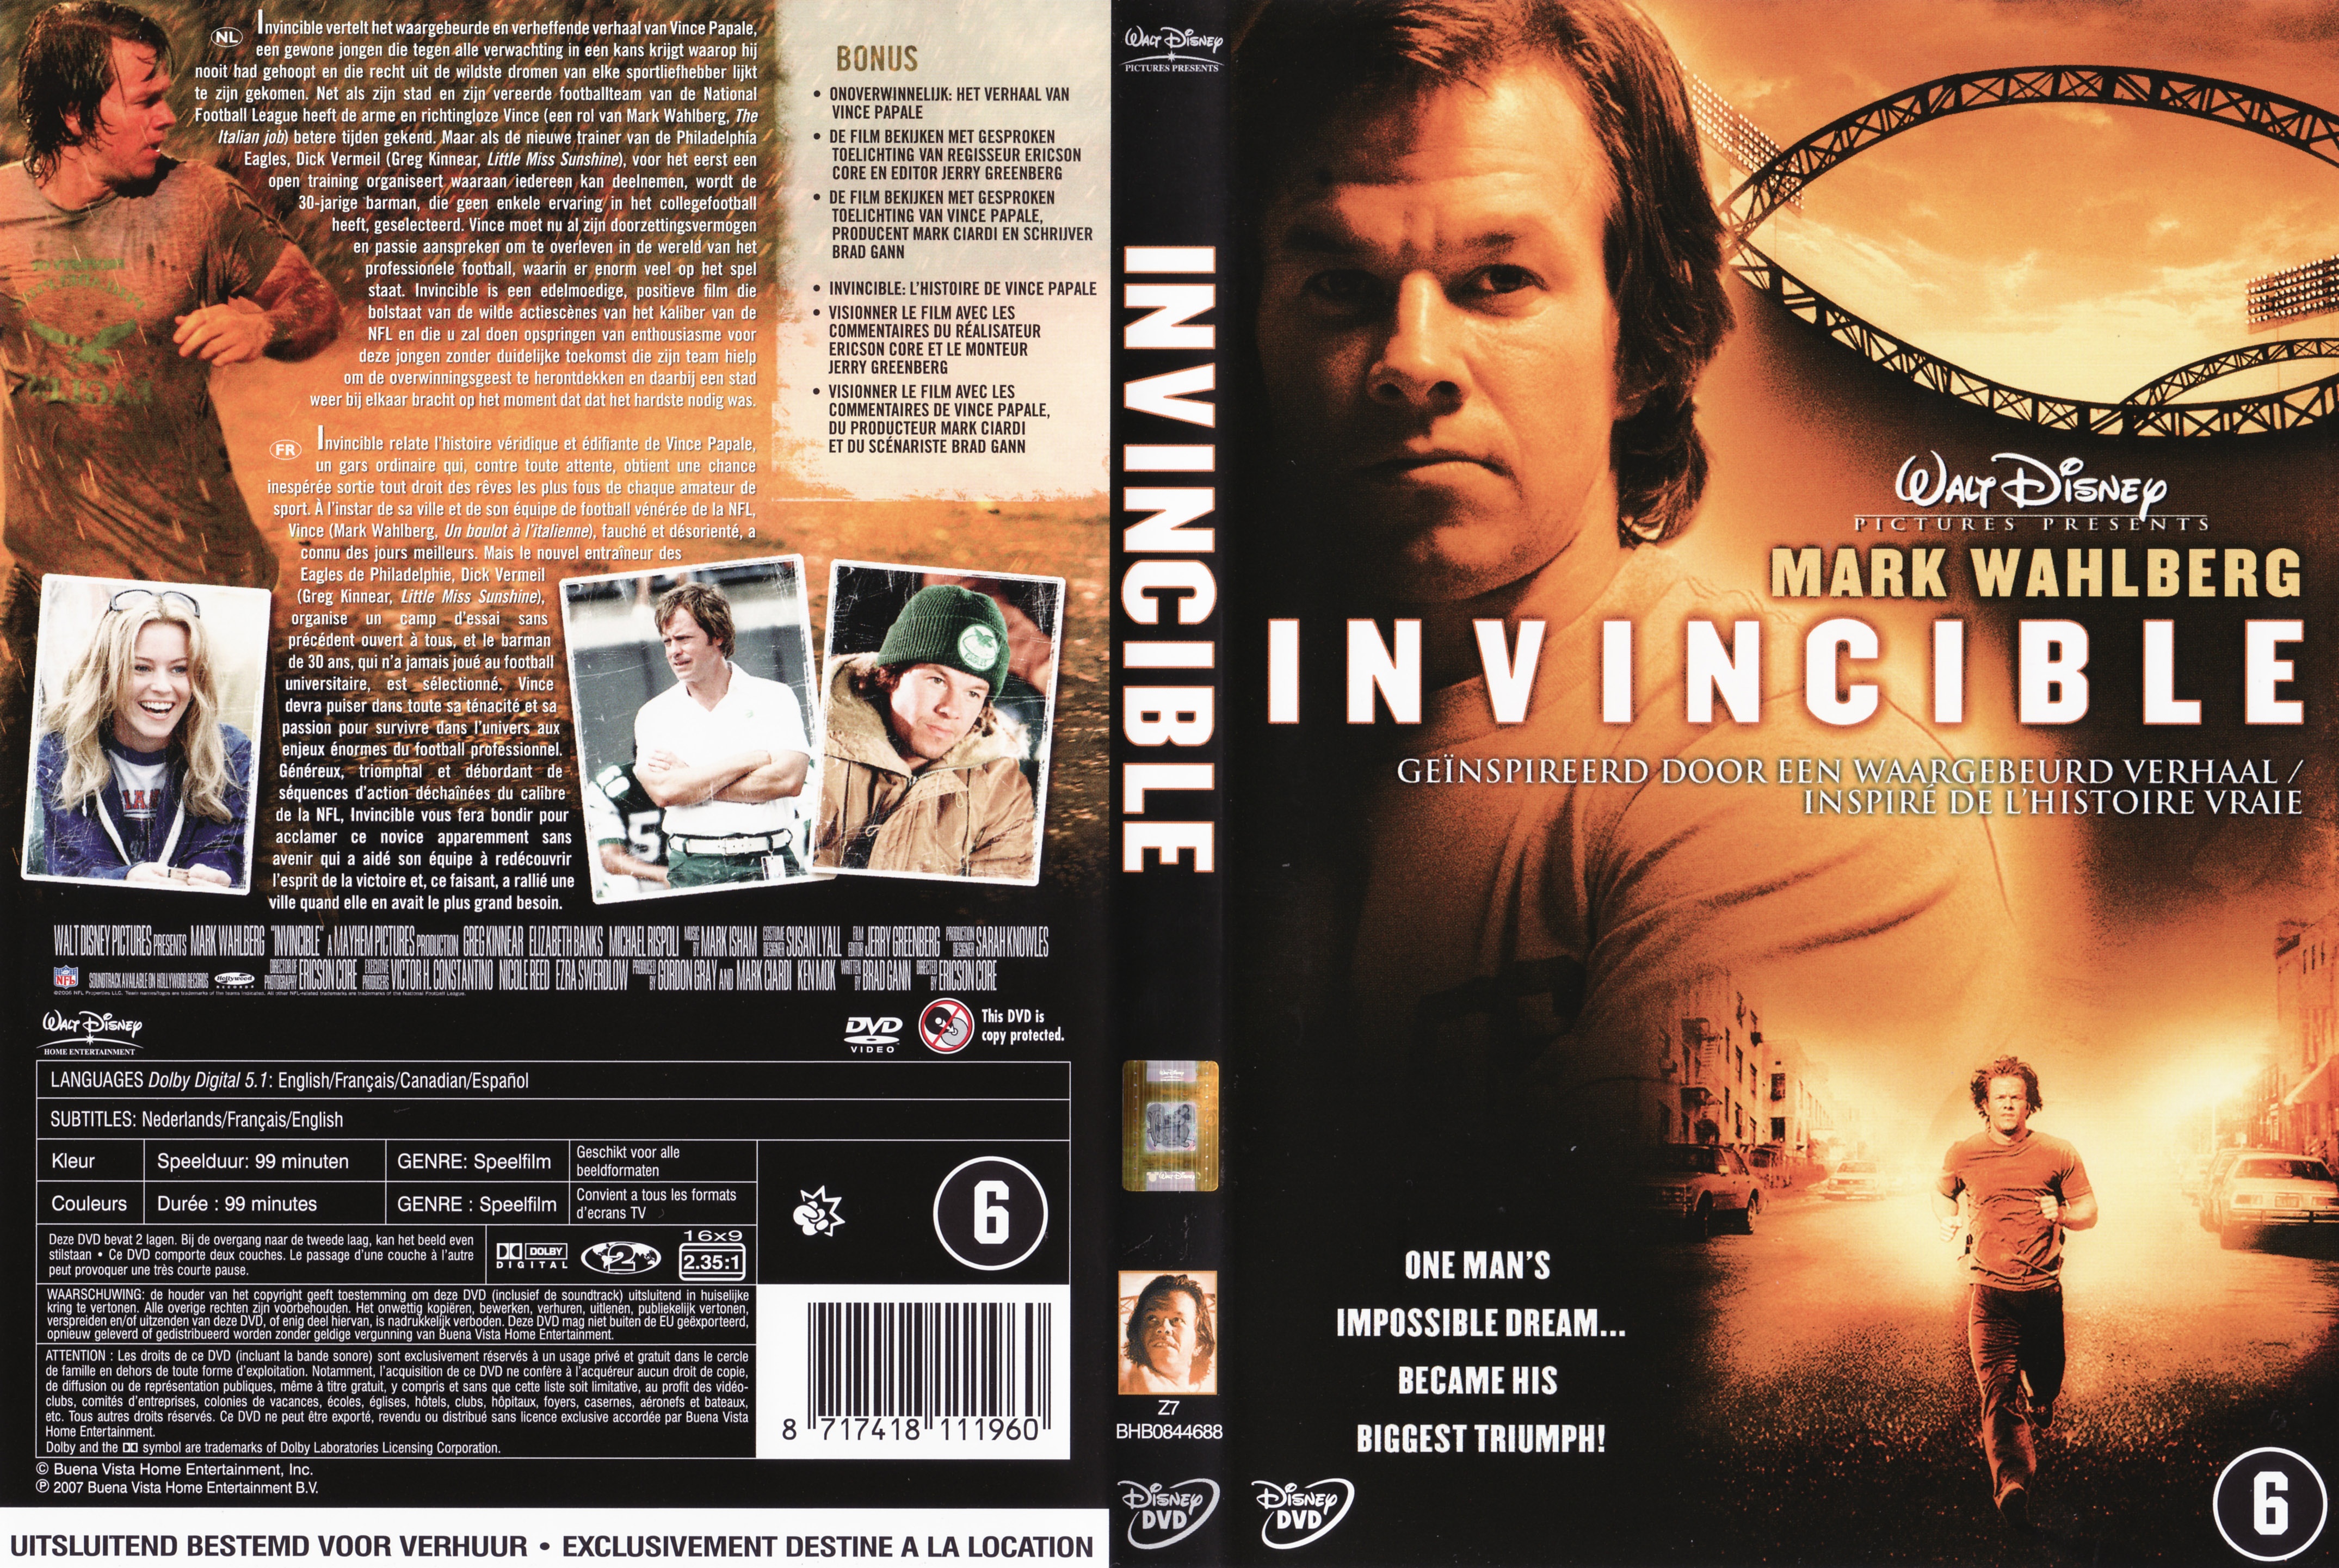 Jaquette DVD Invincible (Mark Wahlberg)